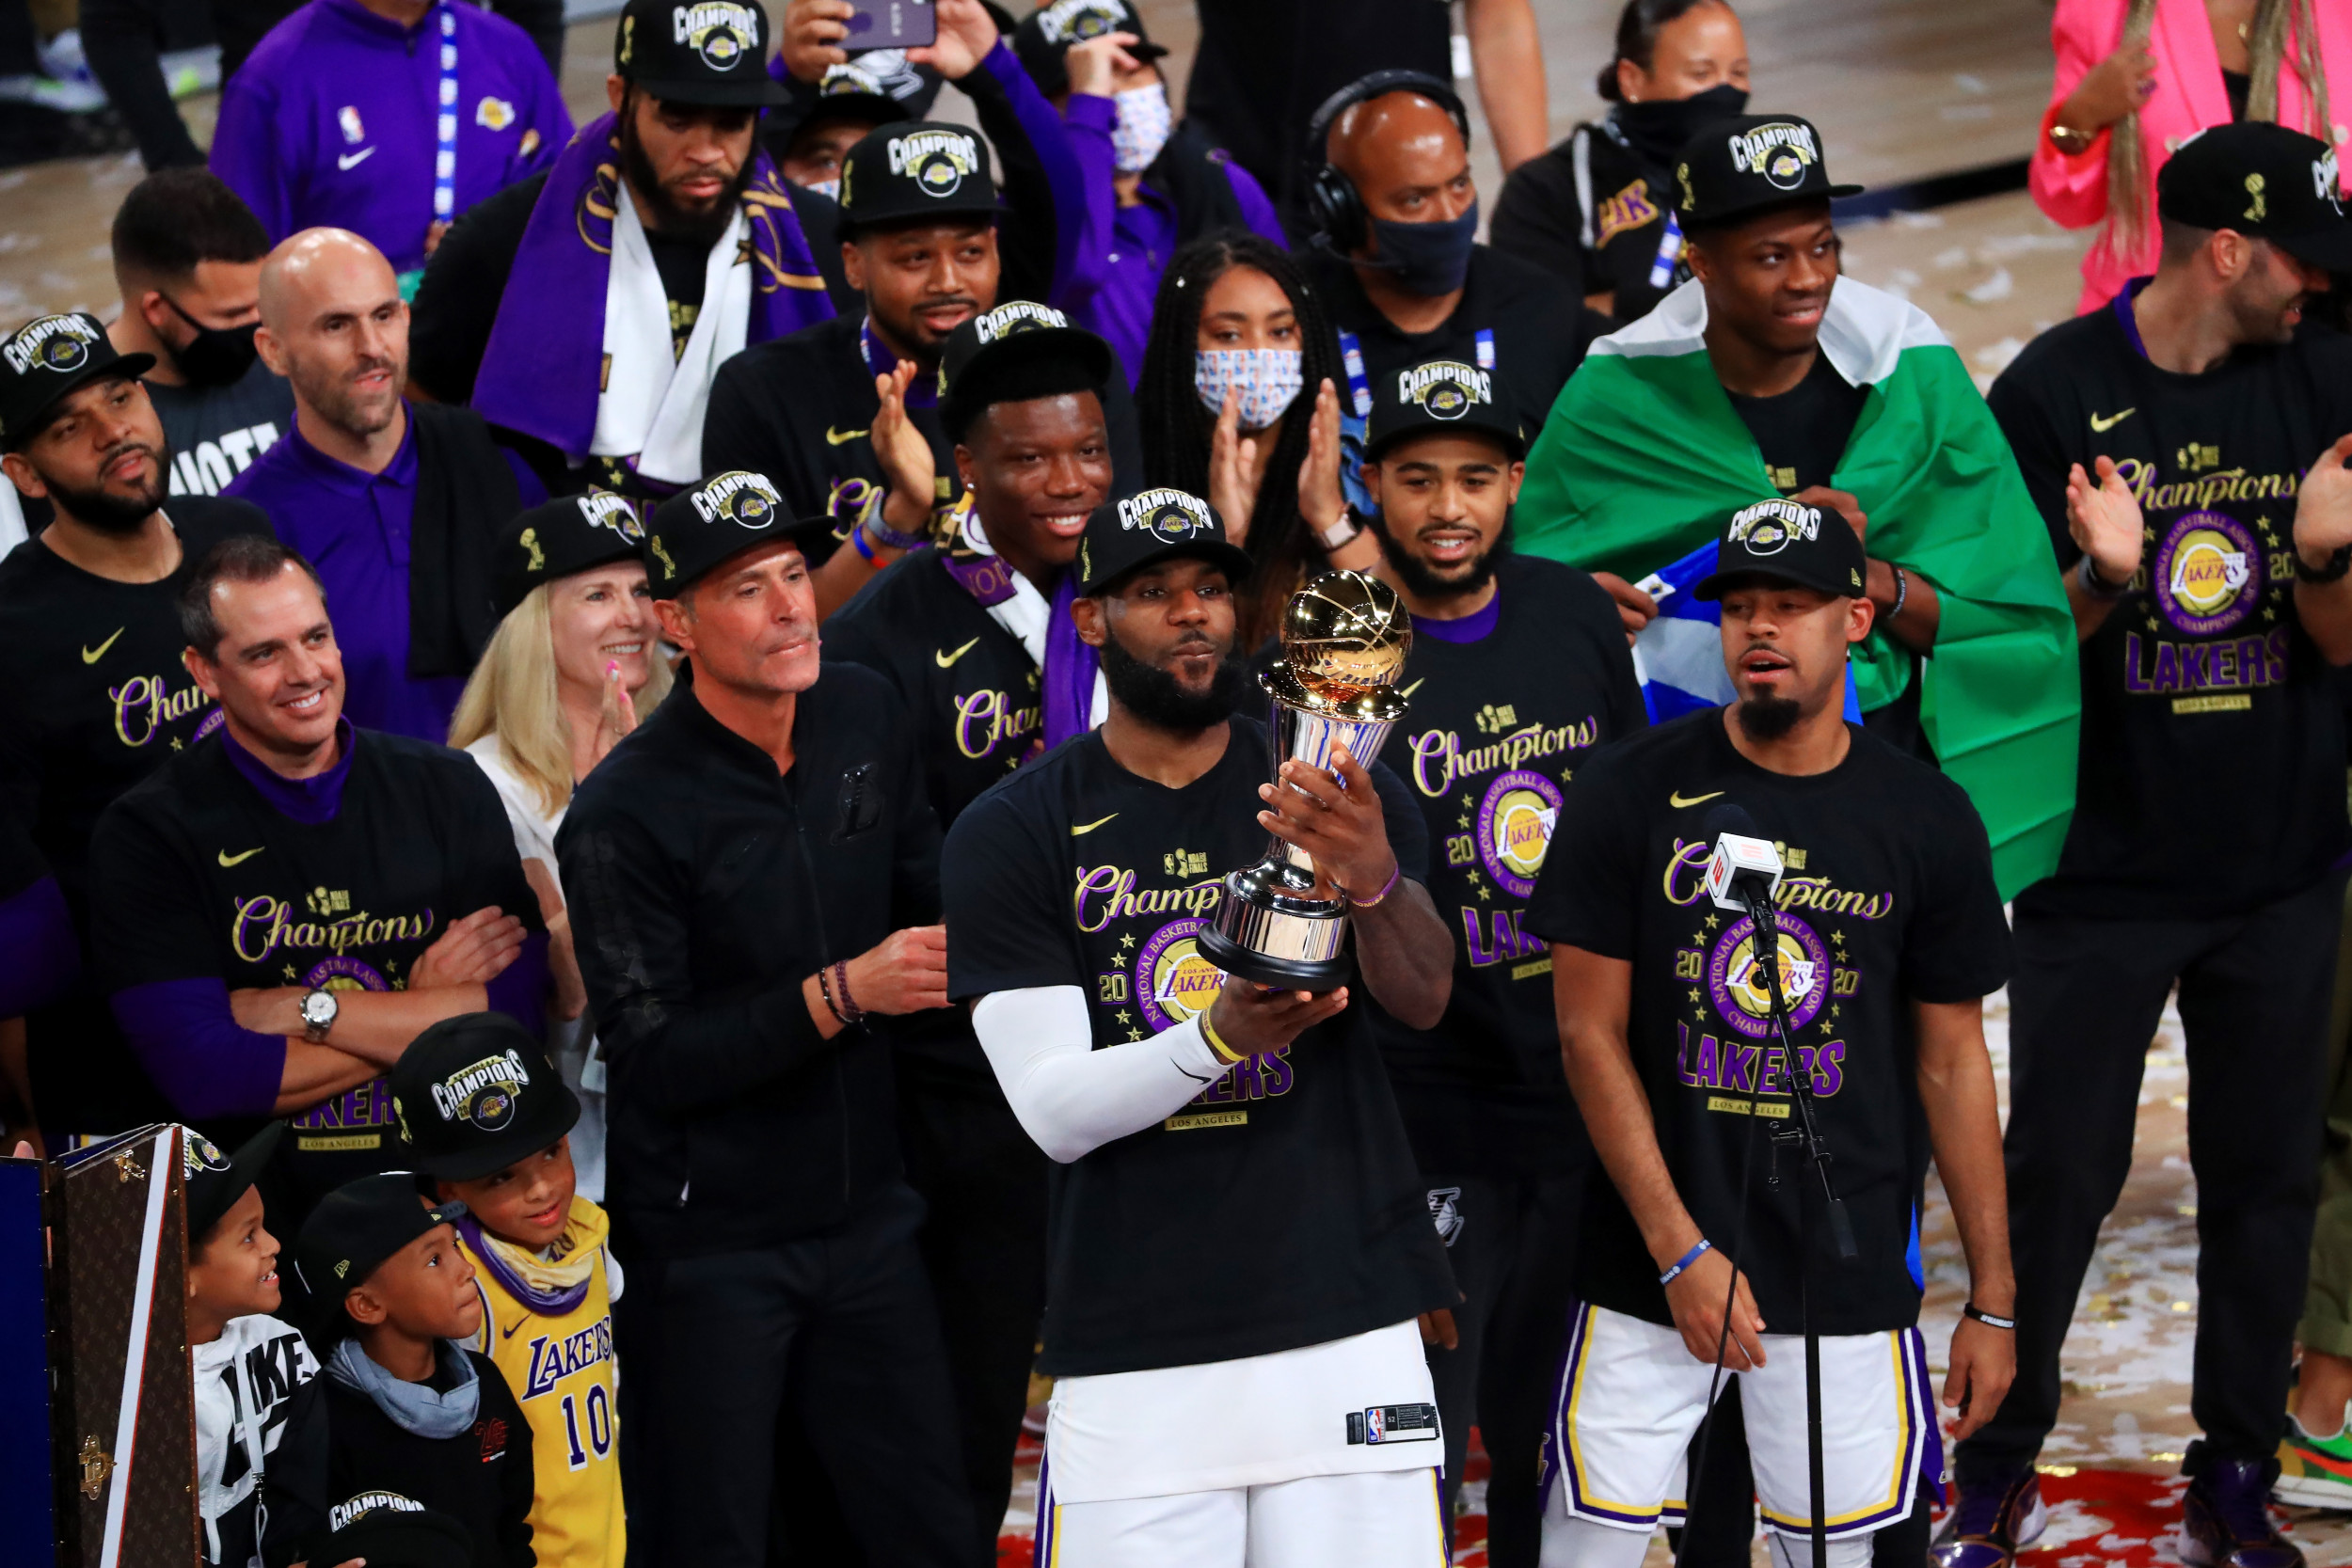 LeBron James' Lakers Win Has Eerie Parallels With Kobe Bryant's 2009 Triumph